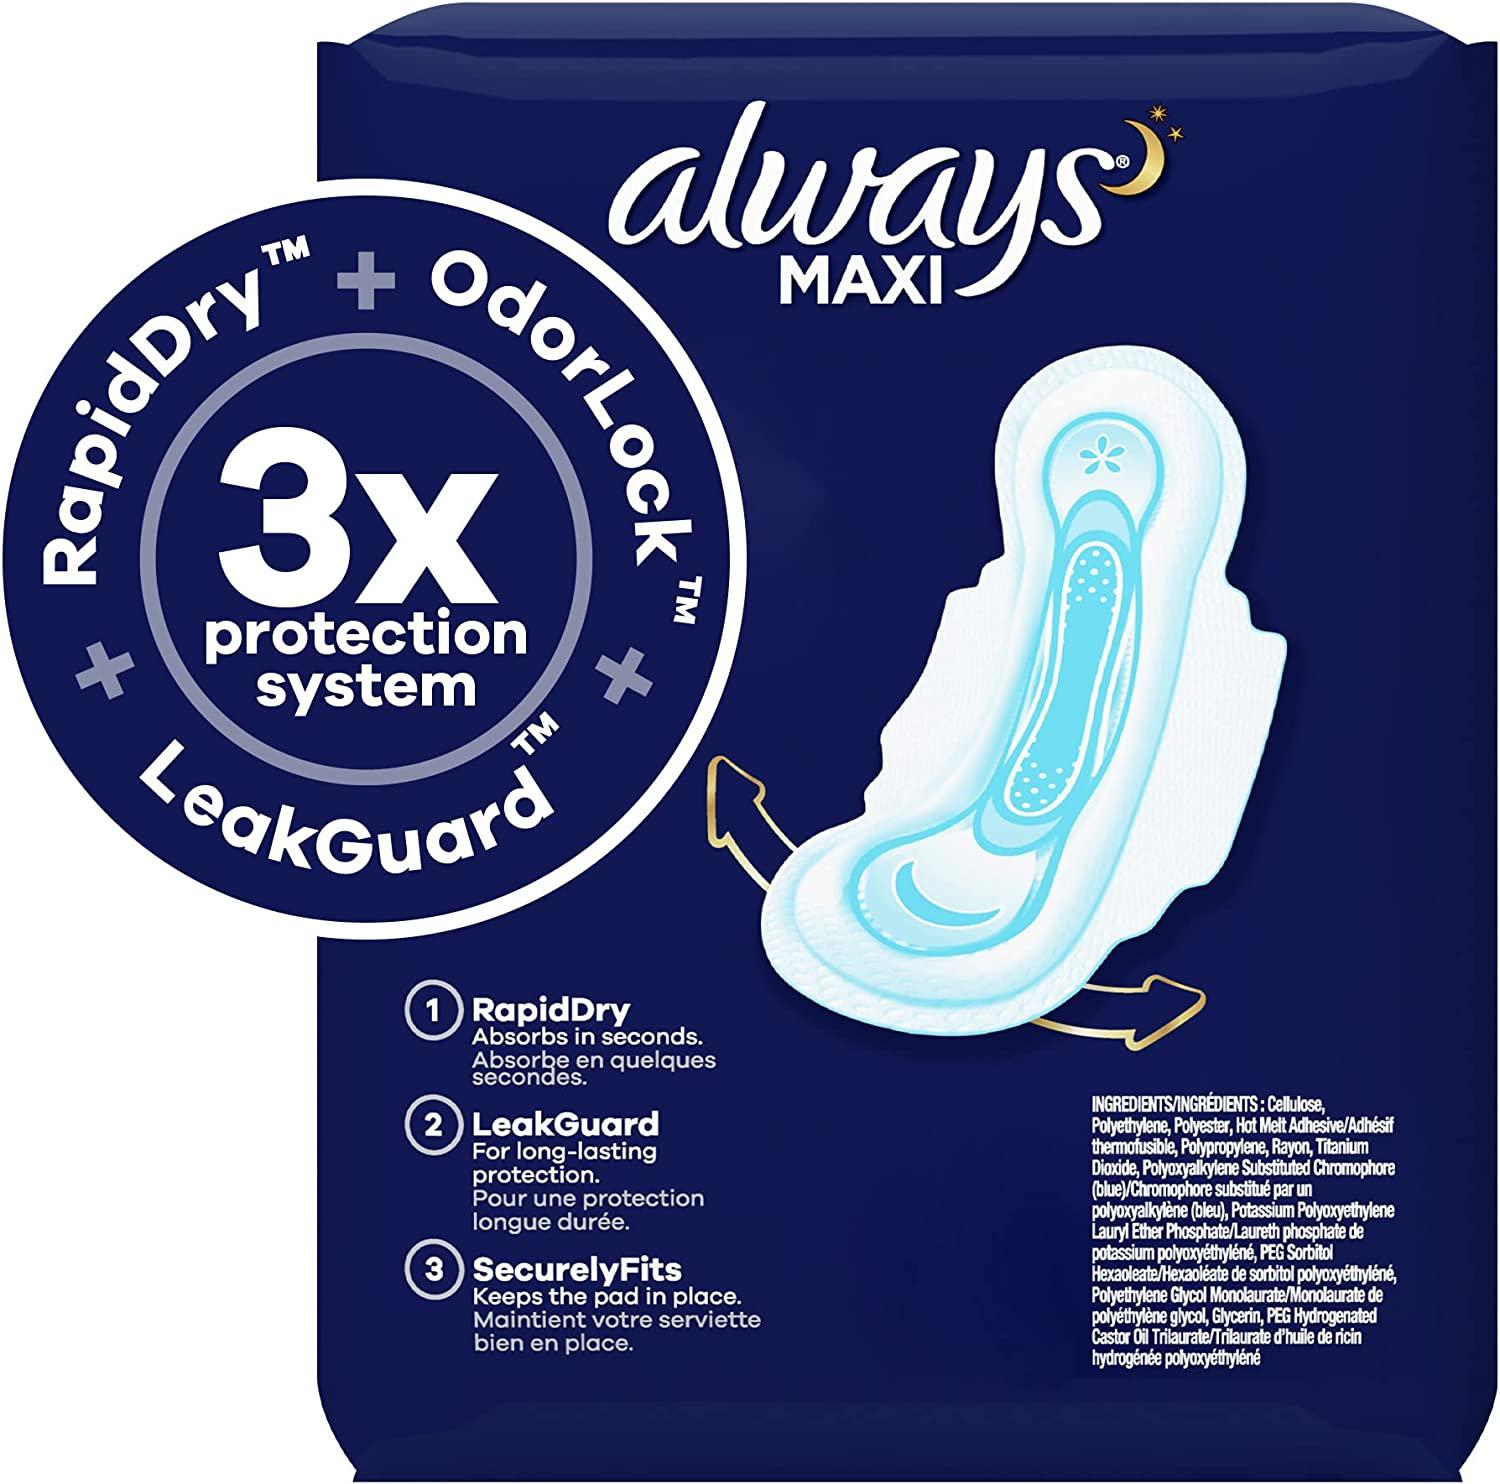 Always Ultra Thin Size 5 Extra Heavy Overnight Unscented Pads With